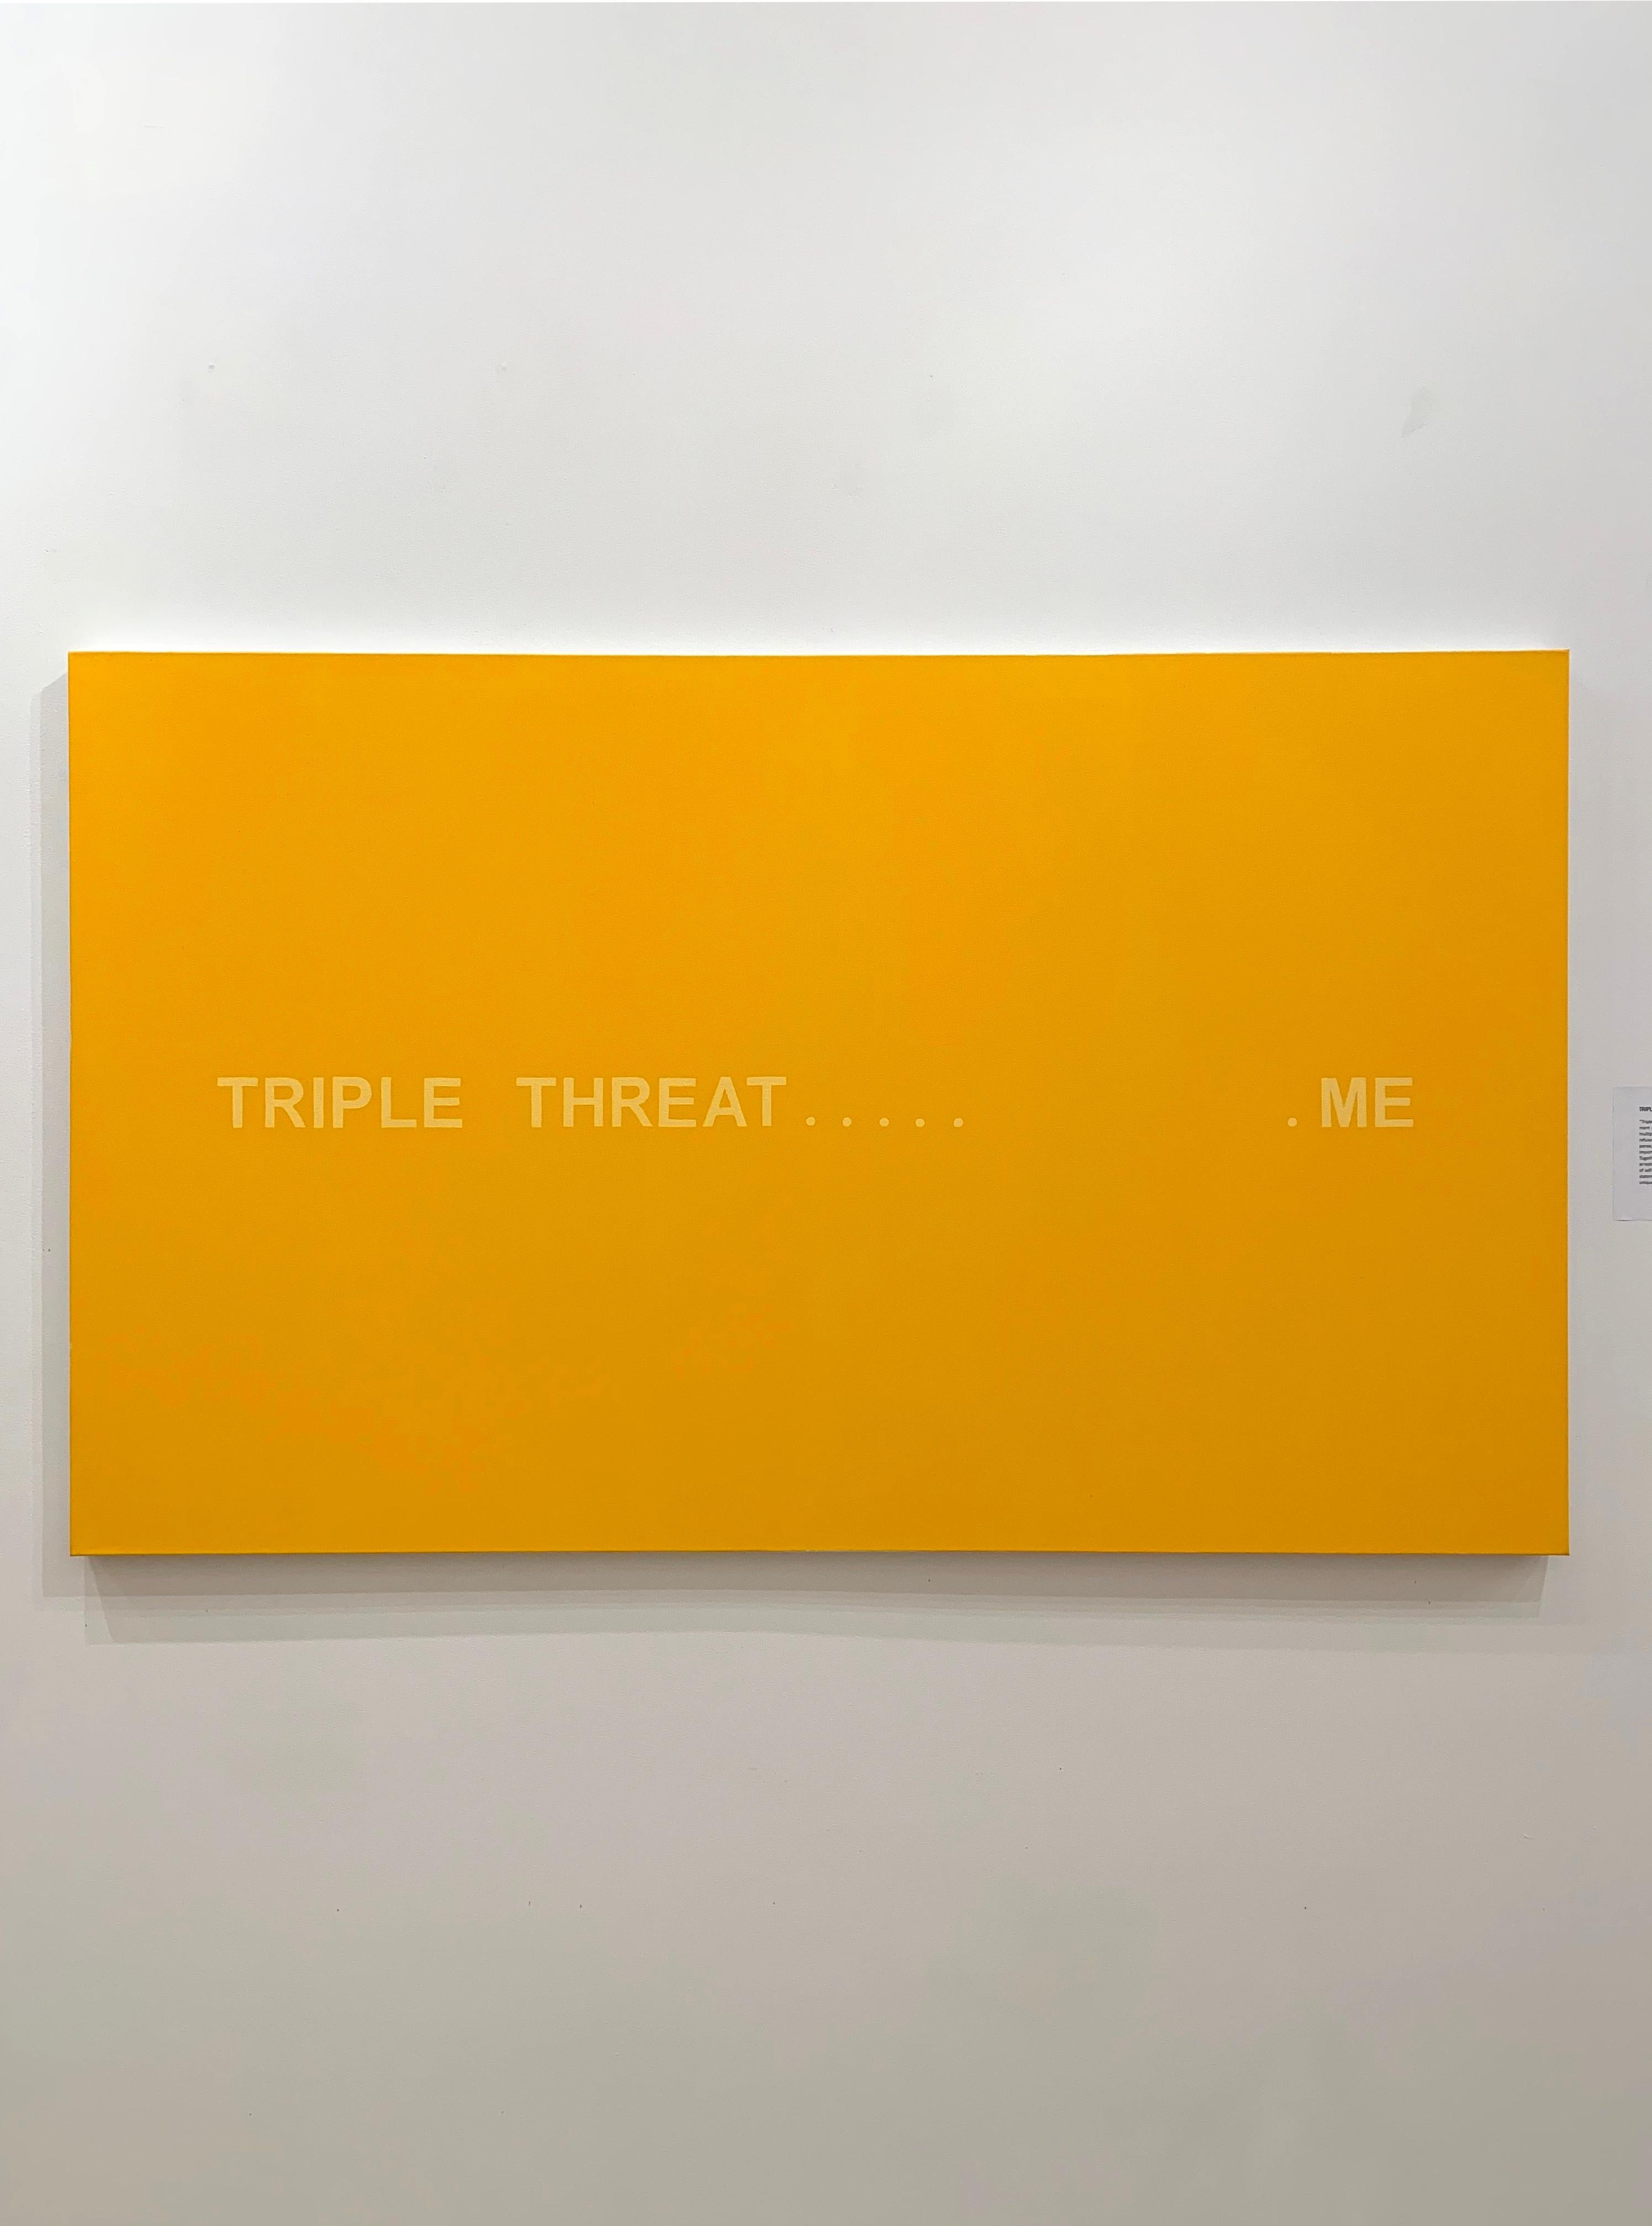 TRIPLE THREAT… ME - Painting by Stephen Bezas